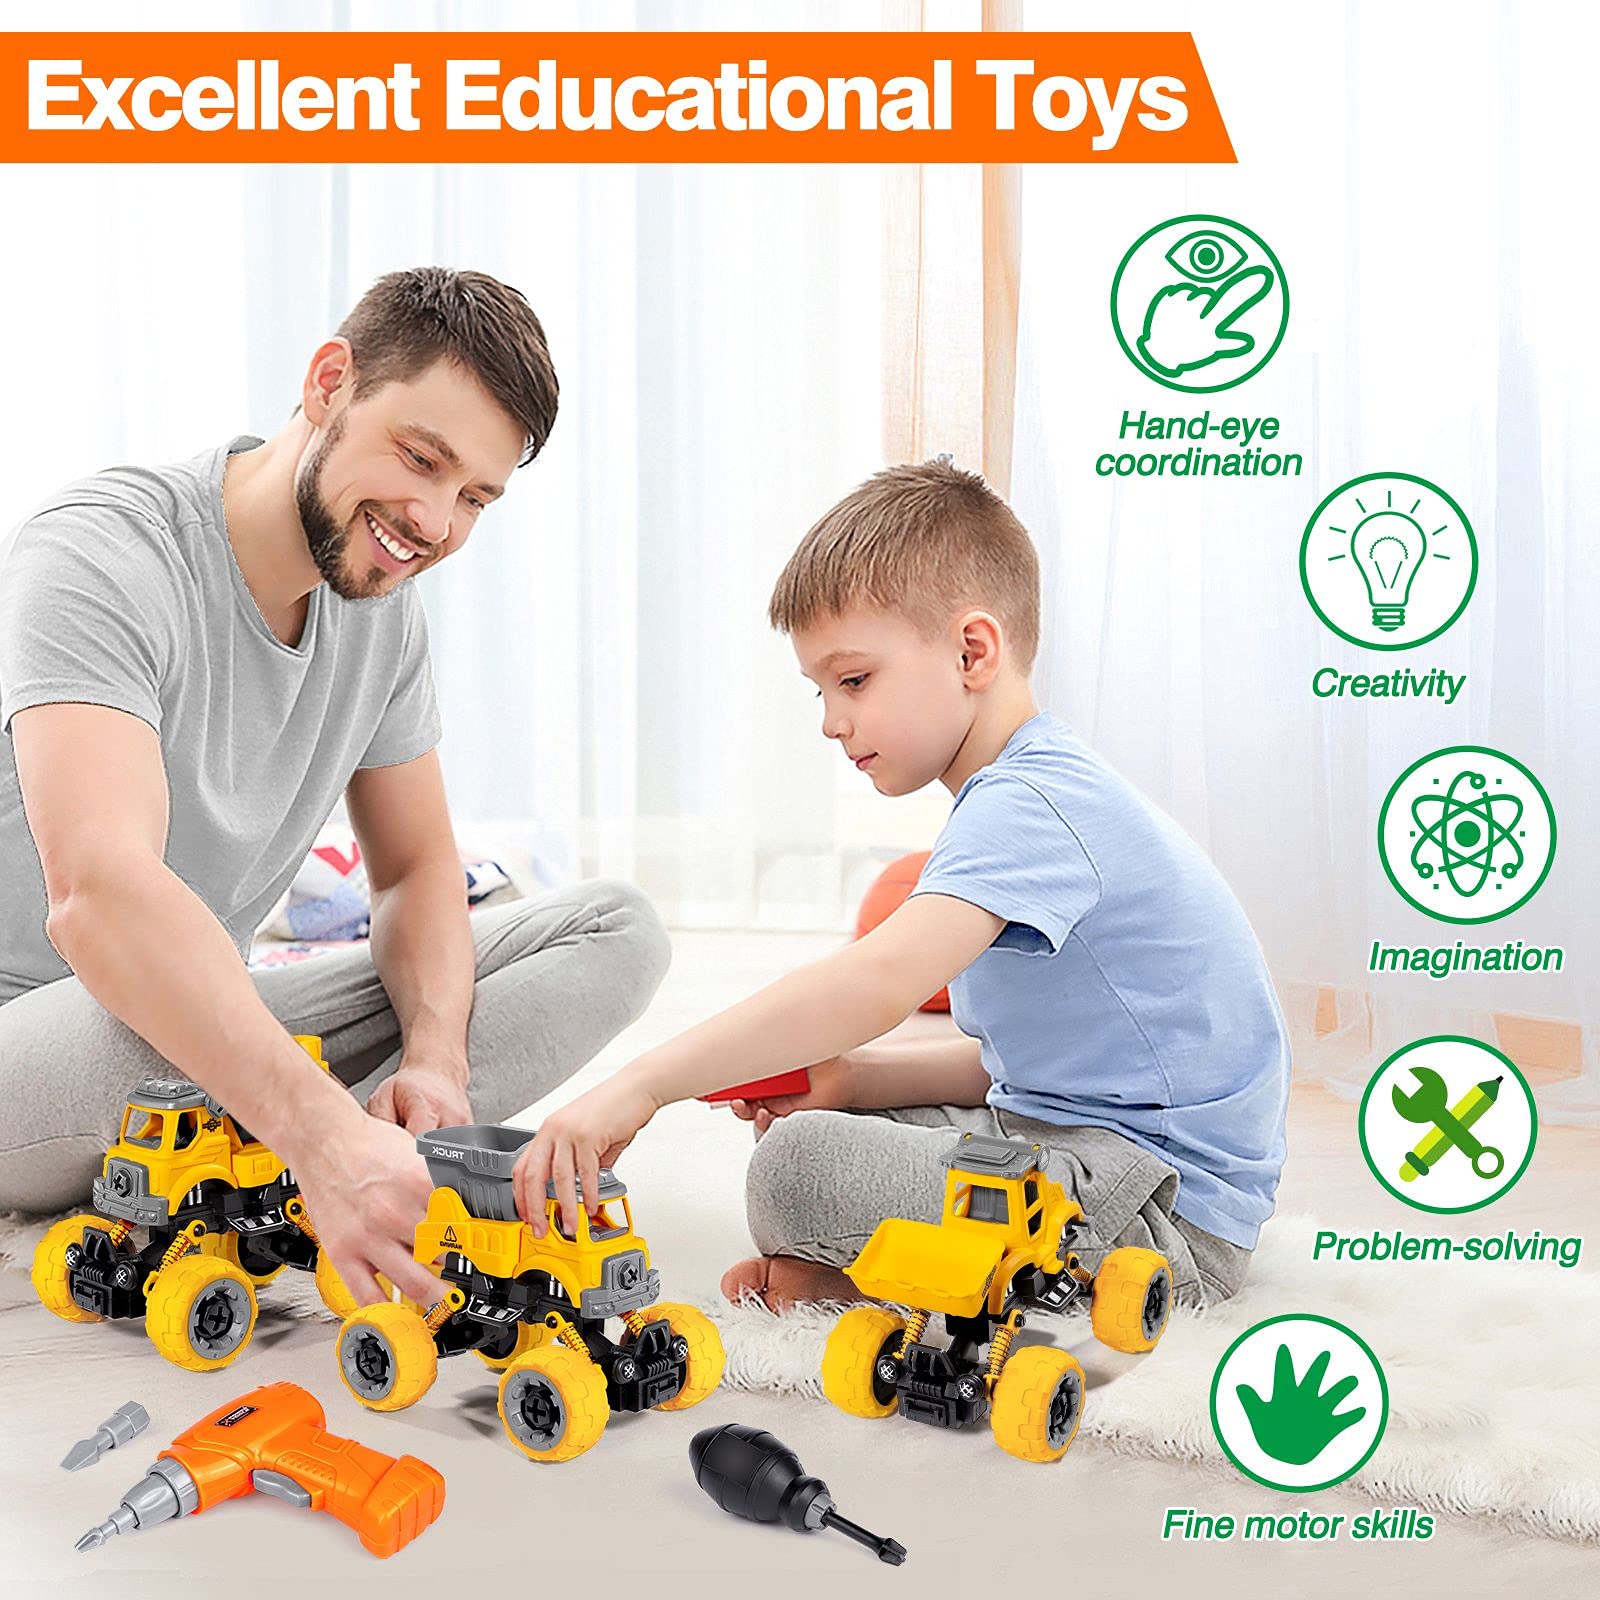 LUDILO 4PCS Take Apart Toys for 4 Year Old Boys Construction Toys with Electric Drill DIY Assembly Building Stem Toys Trucks Gifts for 3 4 5 6 7 8 Year Old Boys Girls Kids Learning Educational Toys